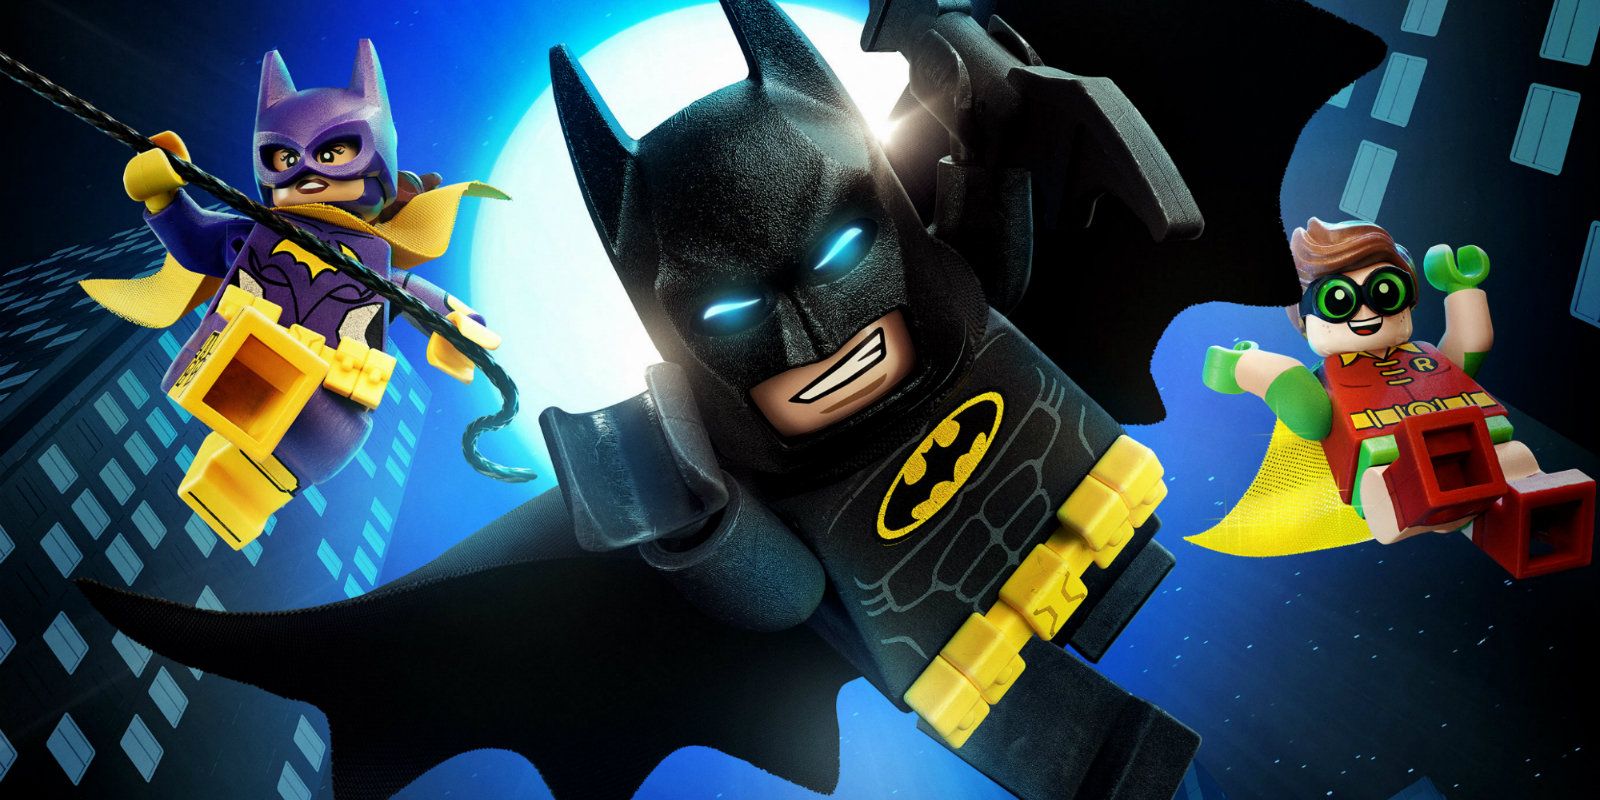 Batman jumps into action with Robin and Batgirl in The Lego Batman Movie